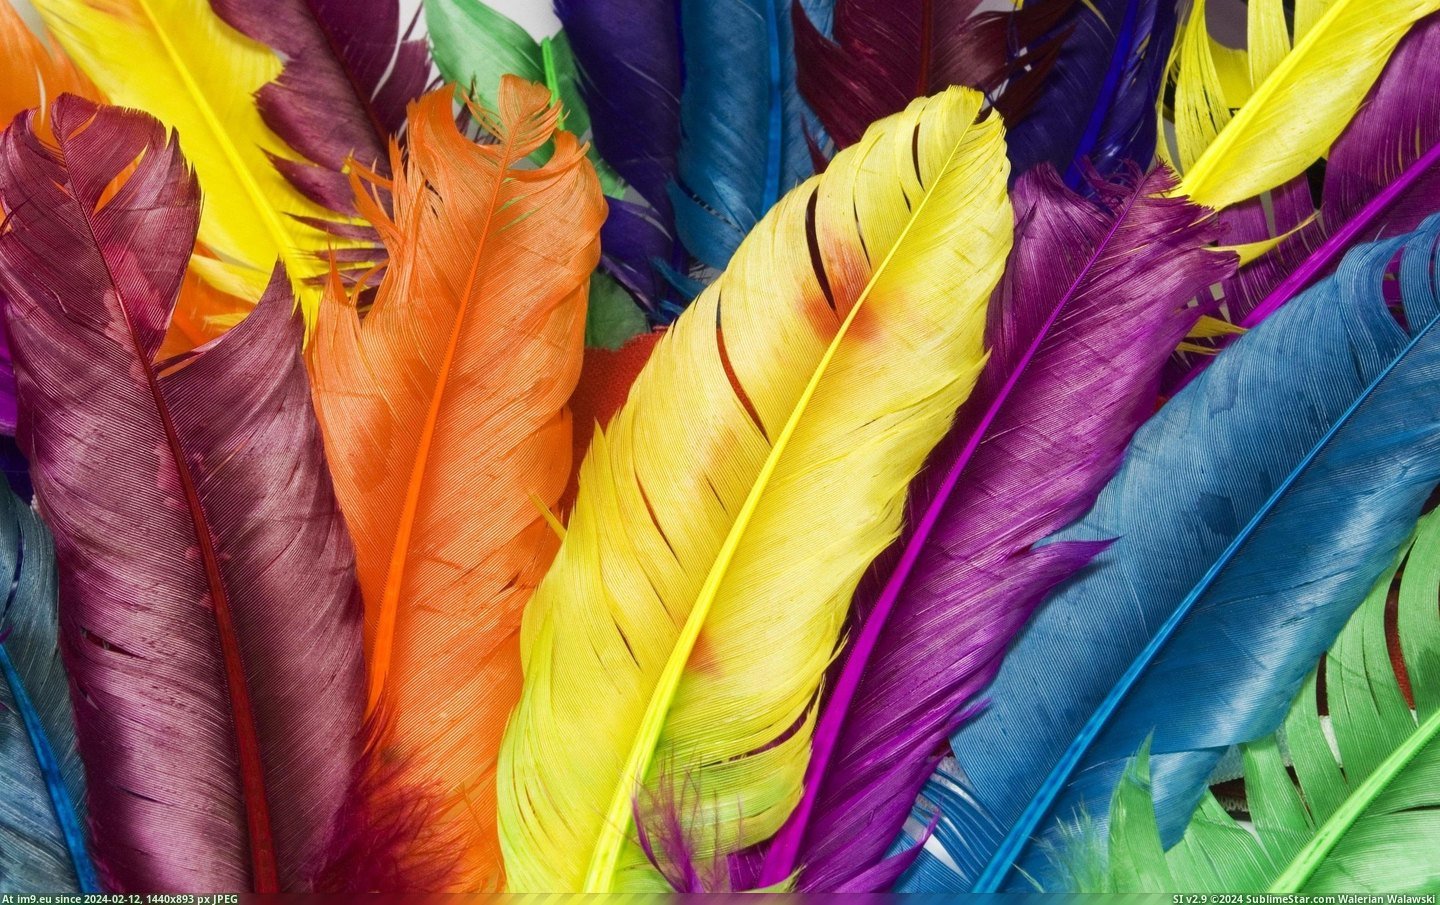 #Wallpaper #Beautiful #Feathers #Wide #Colors Feathers In Colors Wide HD Wallpaper Pic. (Obraz z album Unique HD Wallpapers))